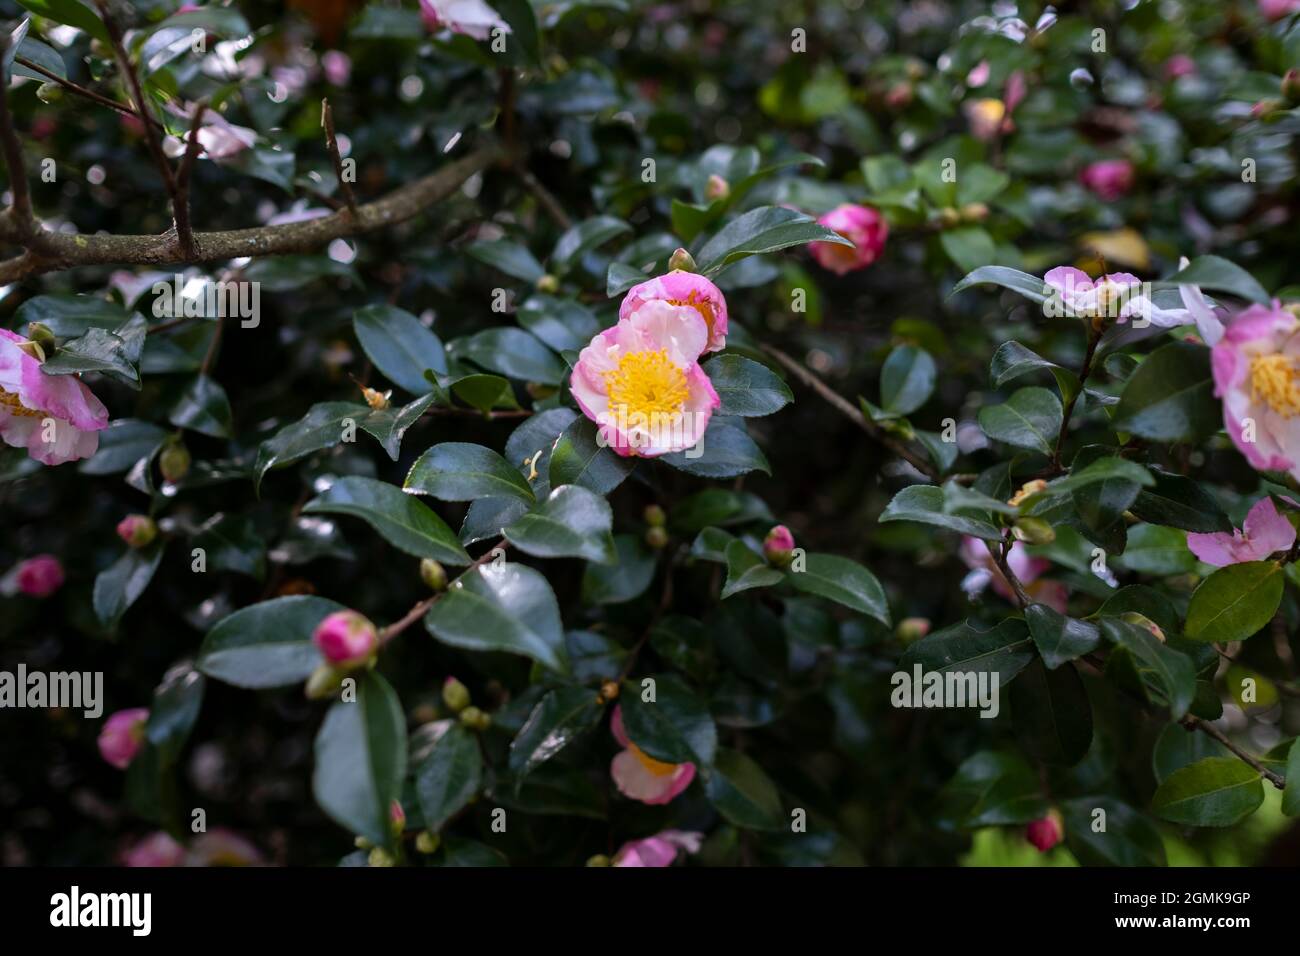 Flowers of camellia japonica, known as common camellia, or Japanese camellia. Stock Photo